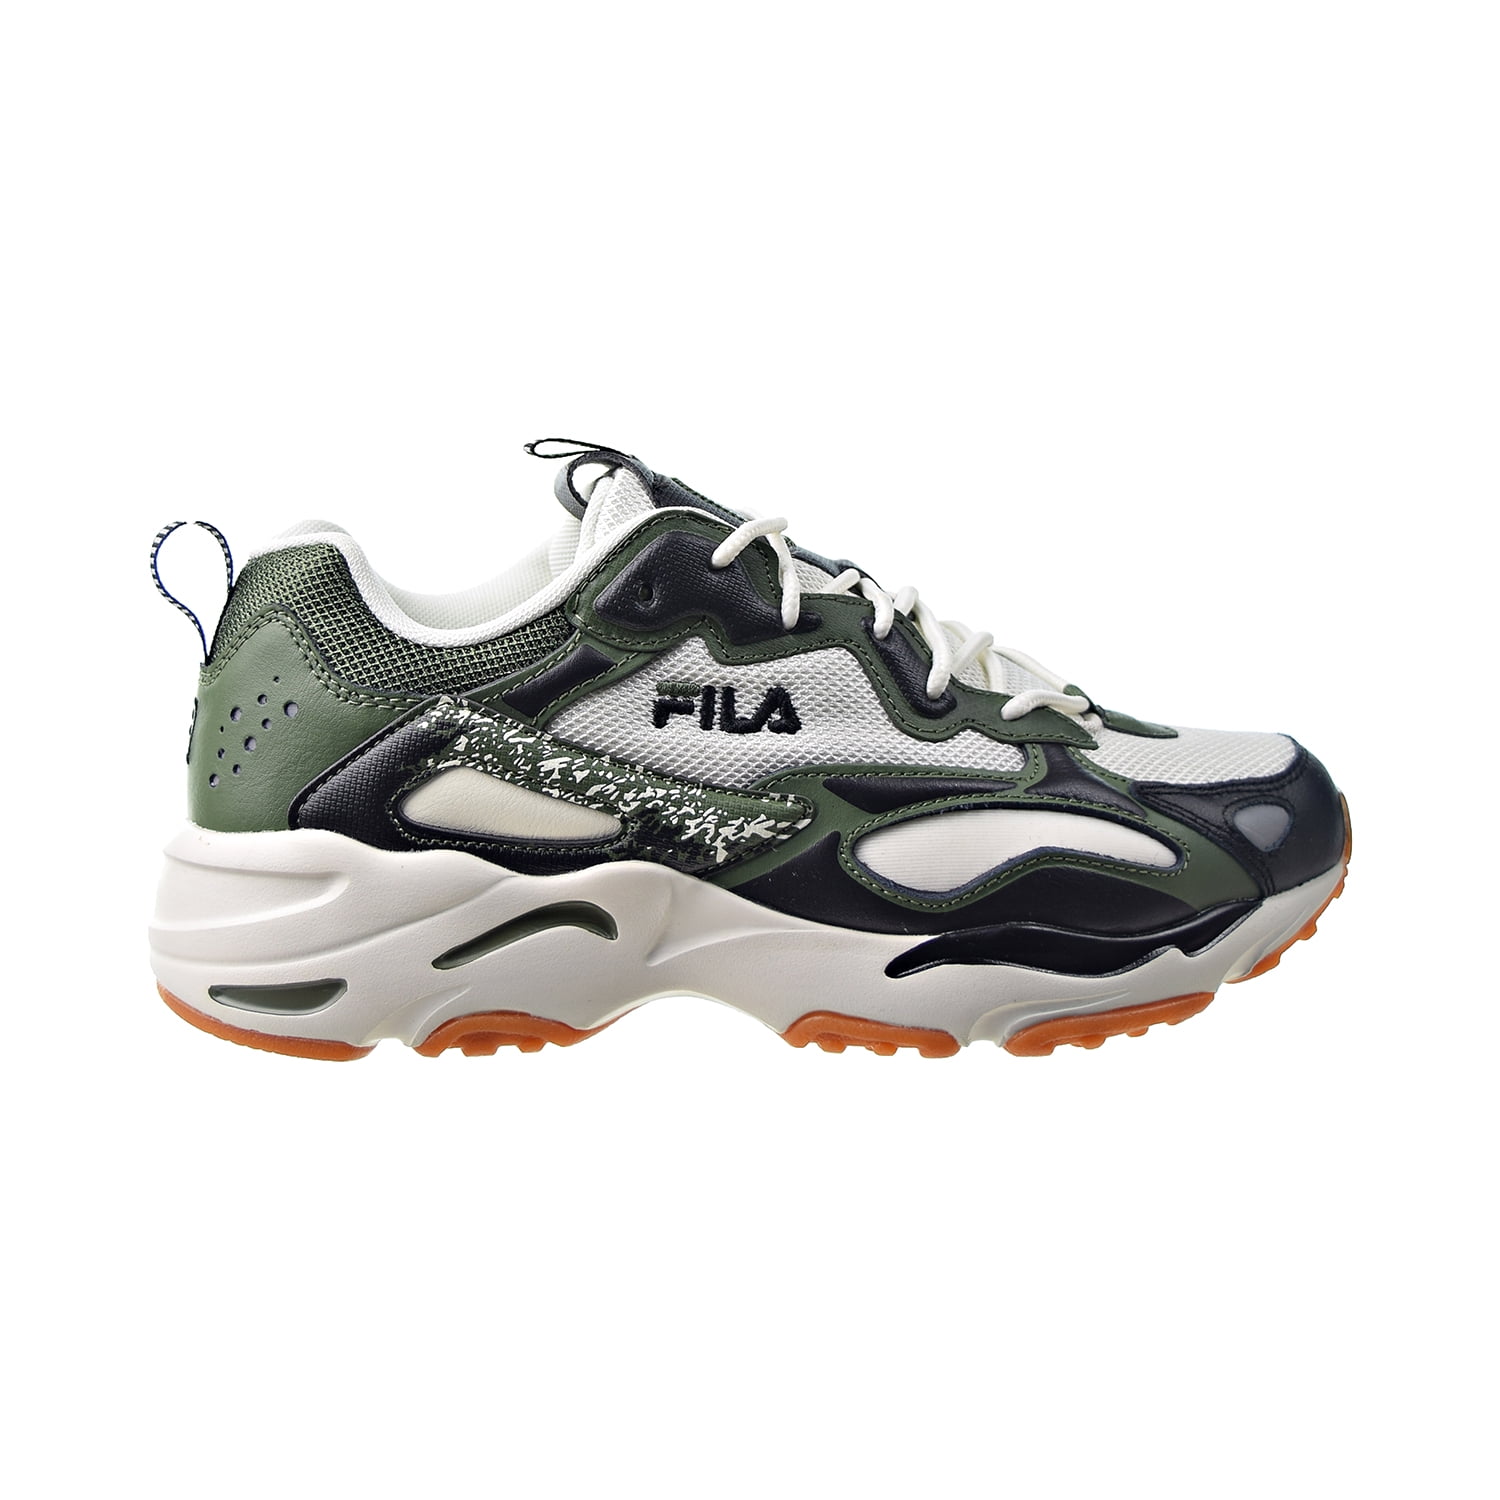 Fila Ray Tracer 2 NXT Men's Shoes Chive-Black-Gum 1rm01231-363 ...